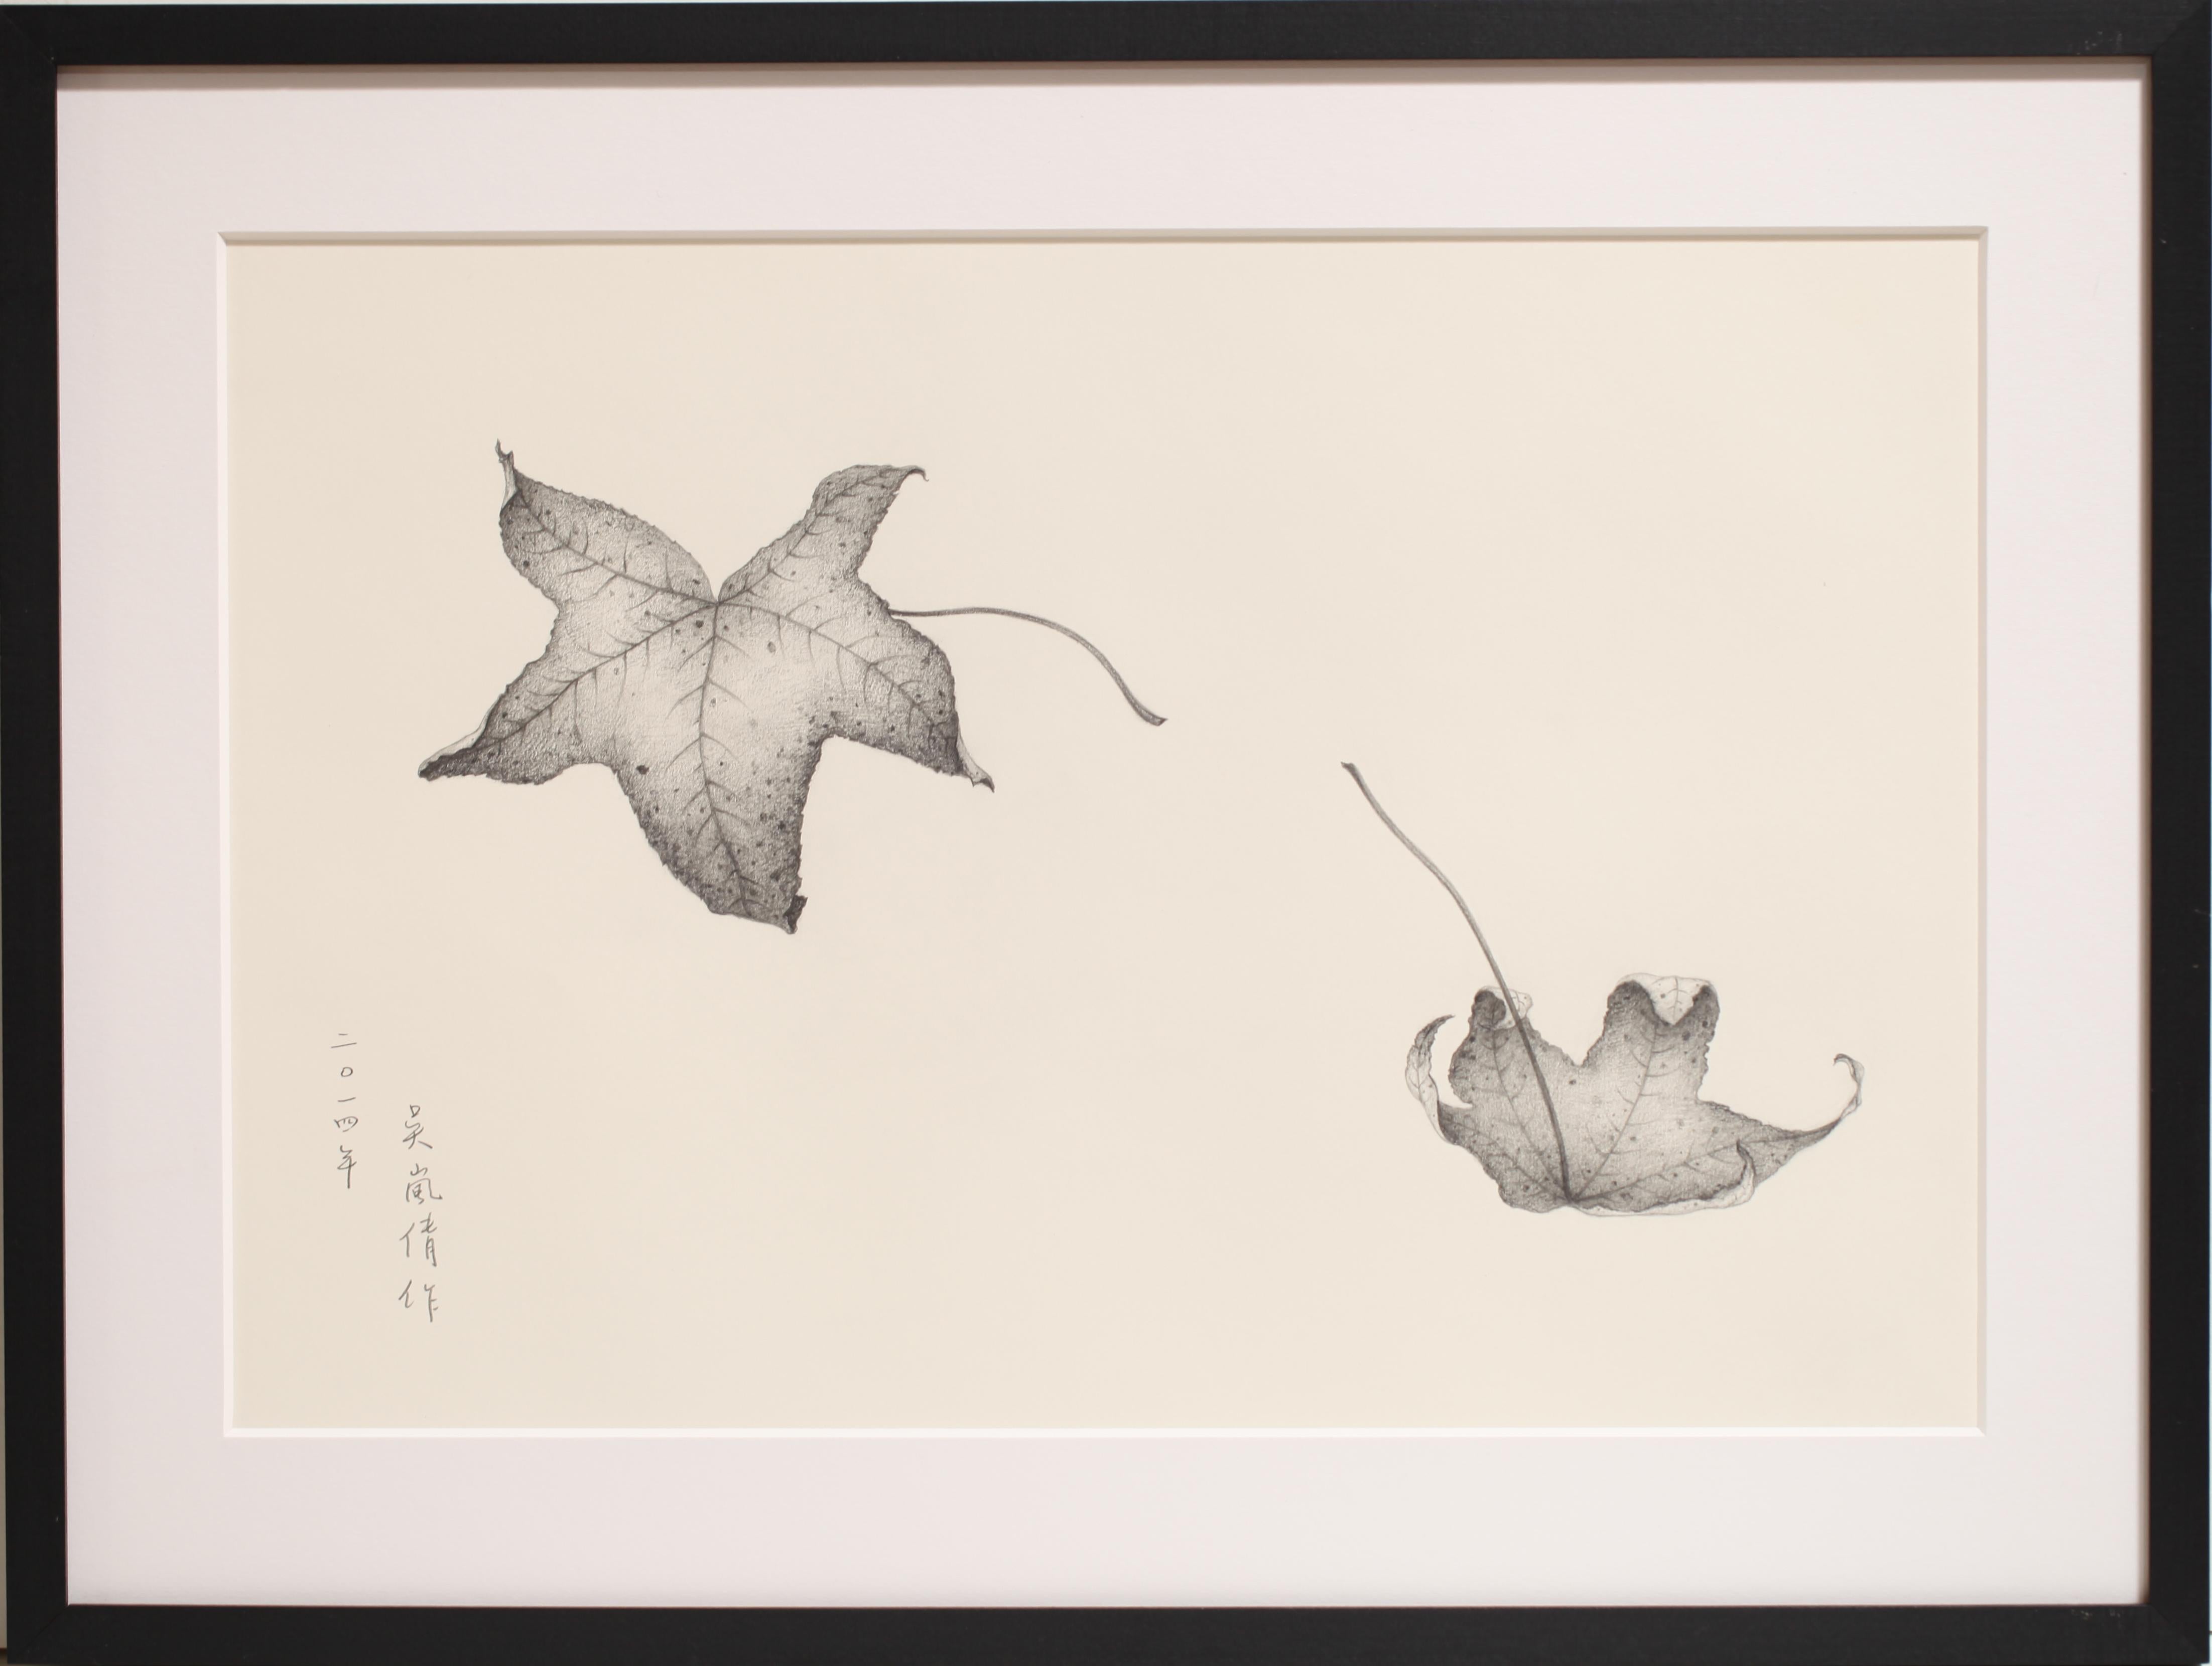 Wu Lan-Chiann Figurative Painting - Pencil on paper - Study of Leaves, 2014, (Framed)